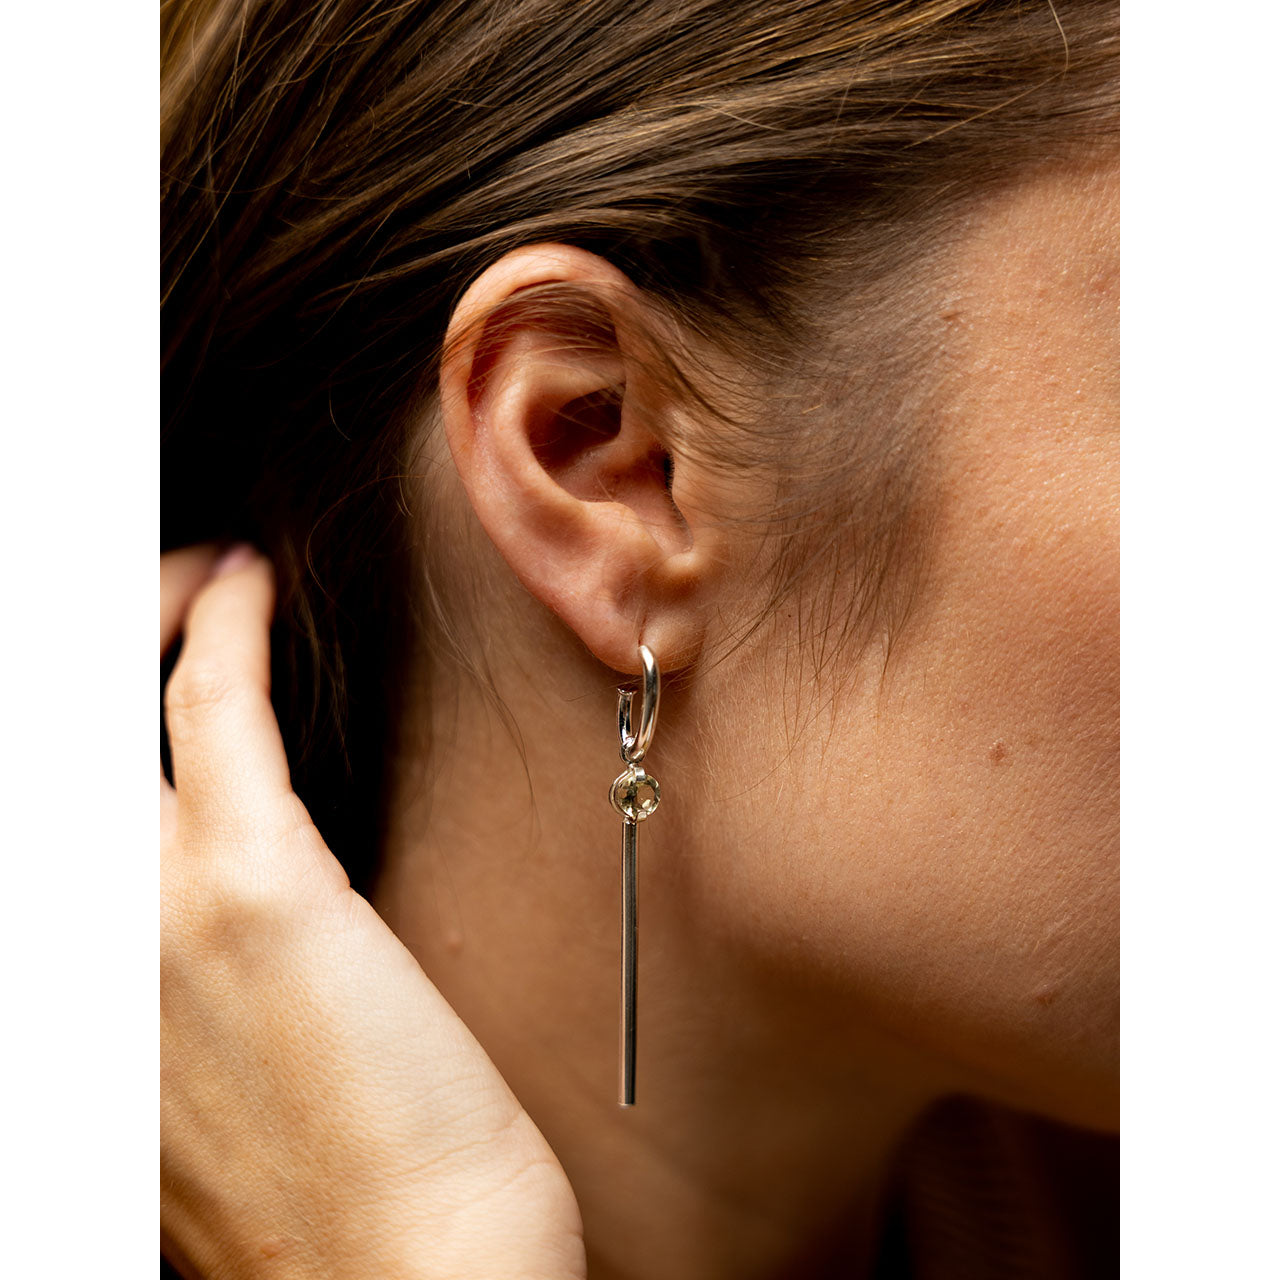 Two of A Kind earrings - Magaly